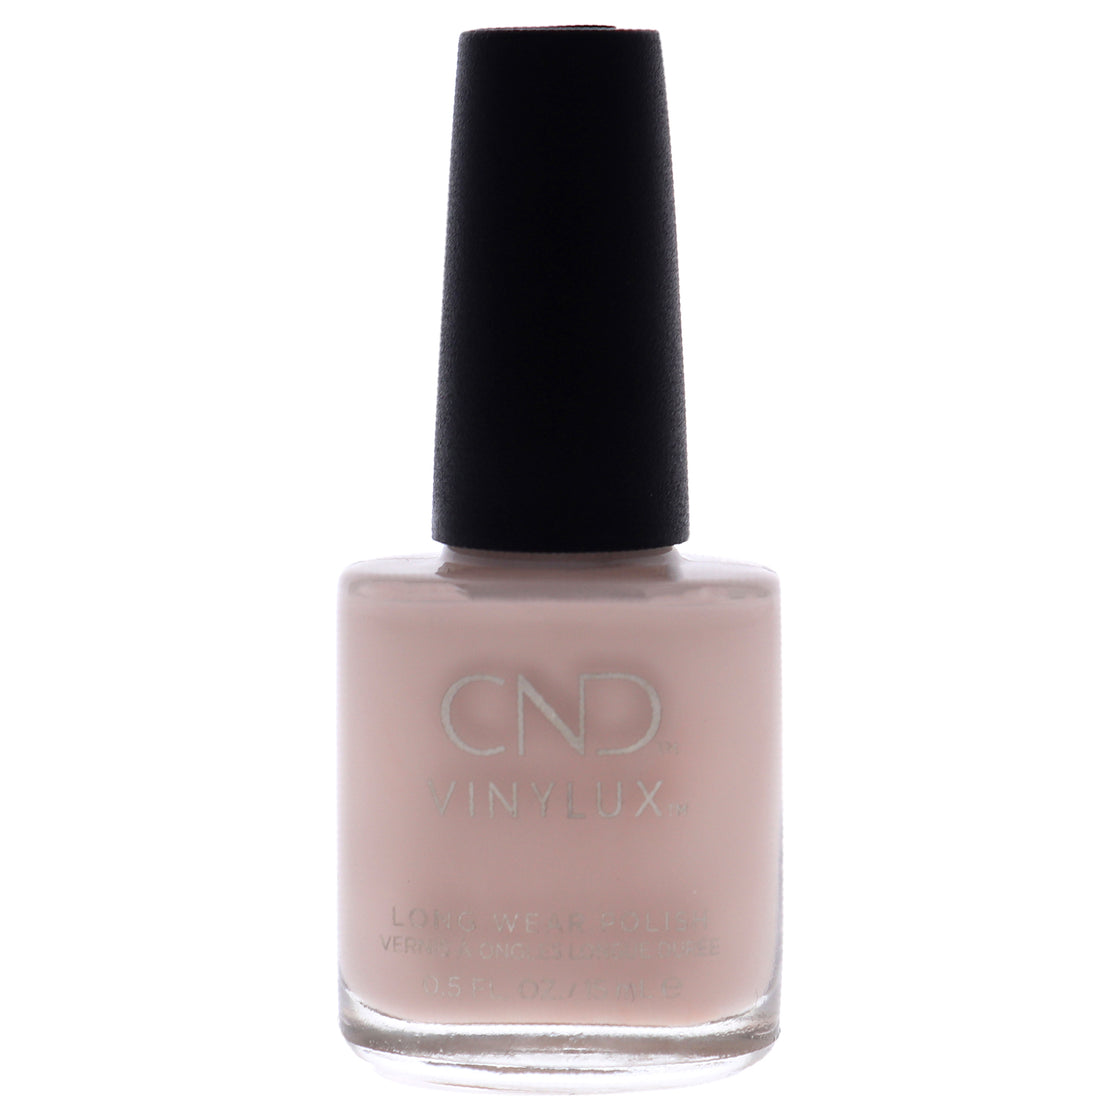 Vinylux Weekly Polish - 259 Cashmere Wrap by CND for Women - 0.5 oz Nail Polish